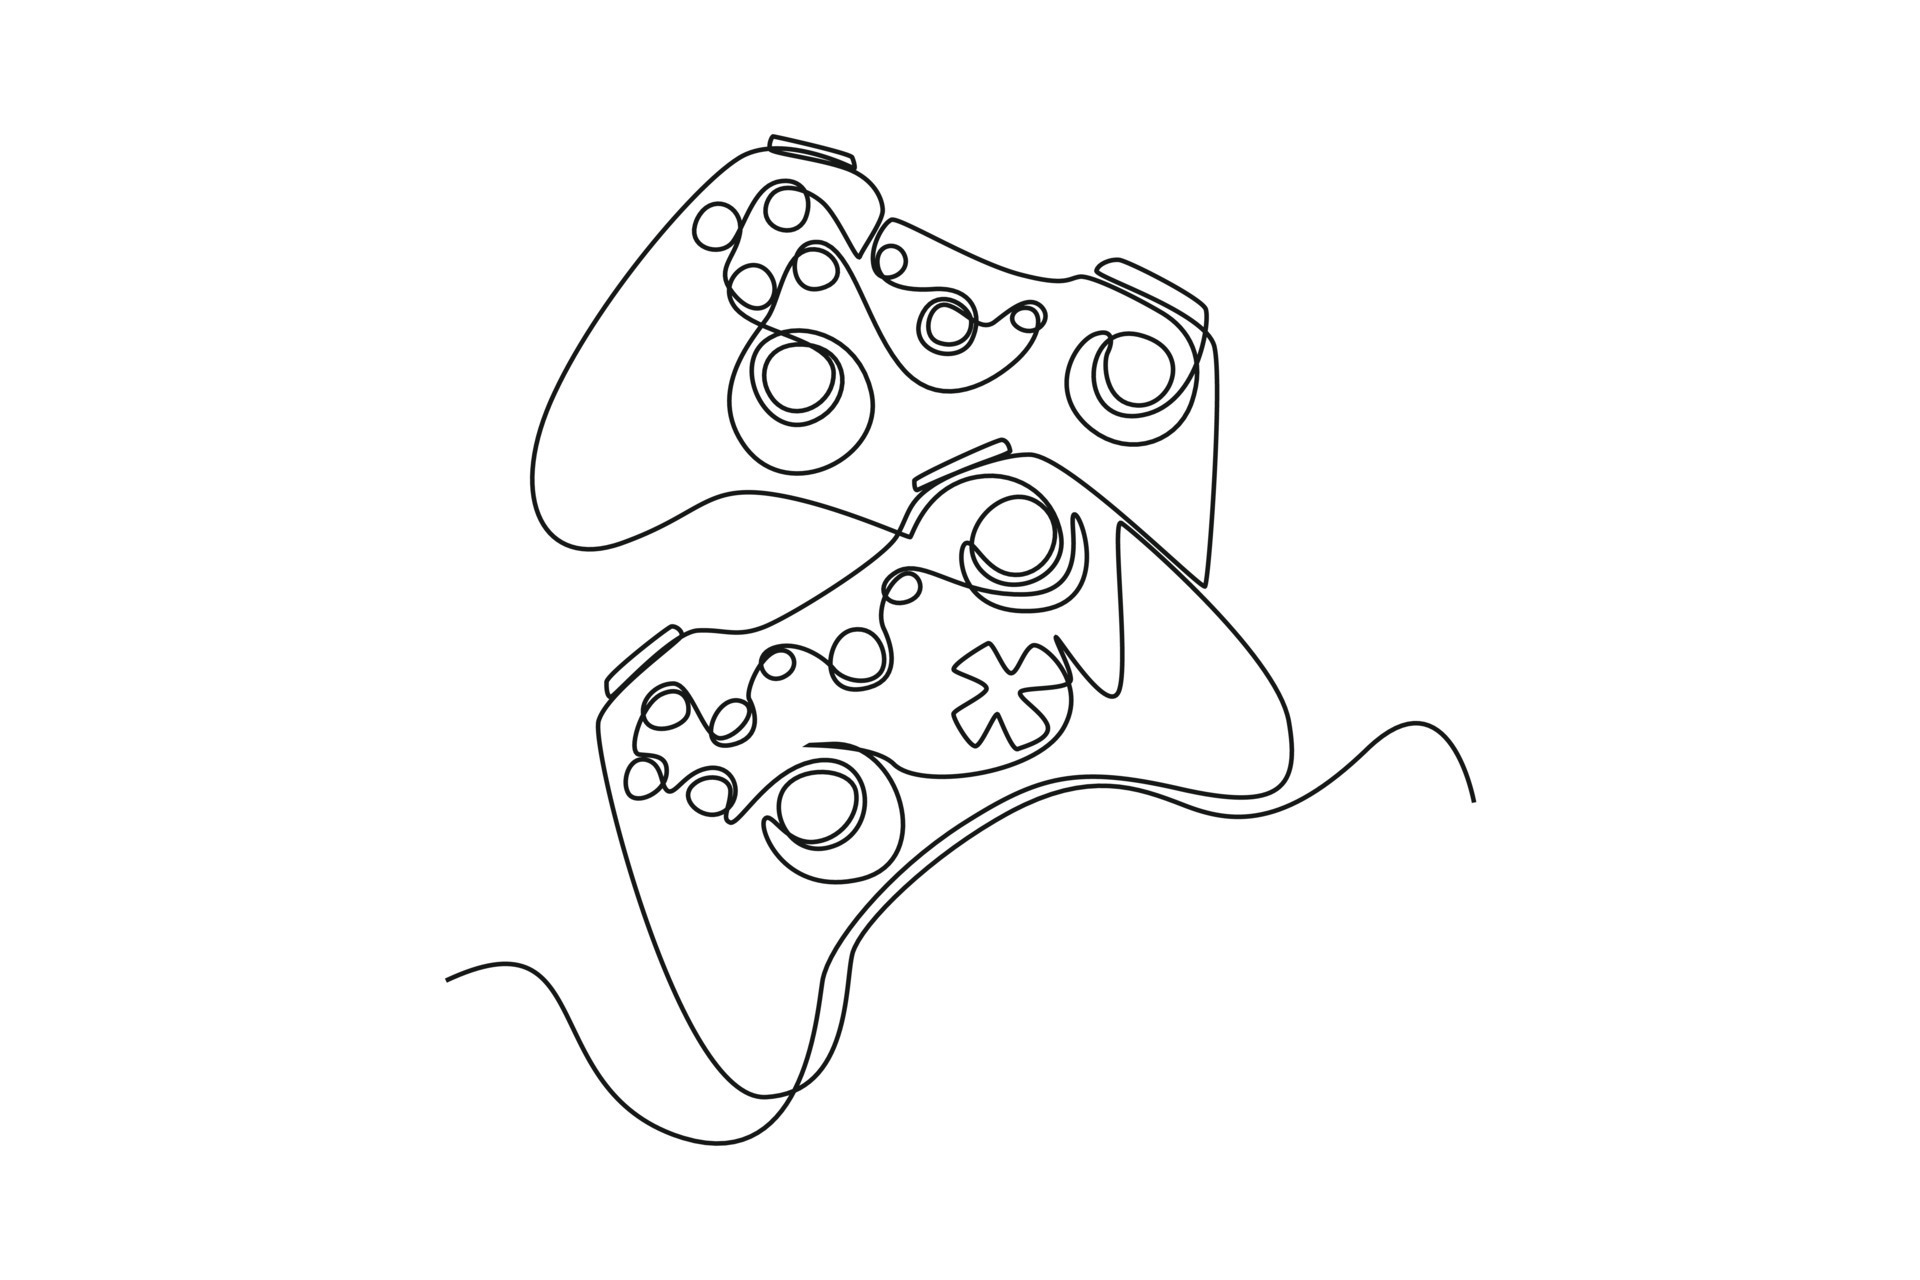 Single continuous line drawing smartphone connected with gamepad